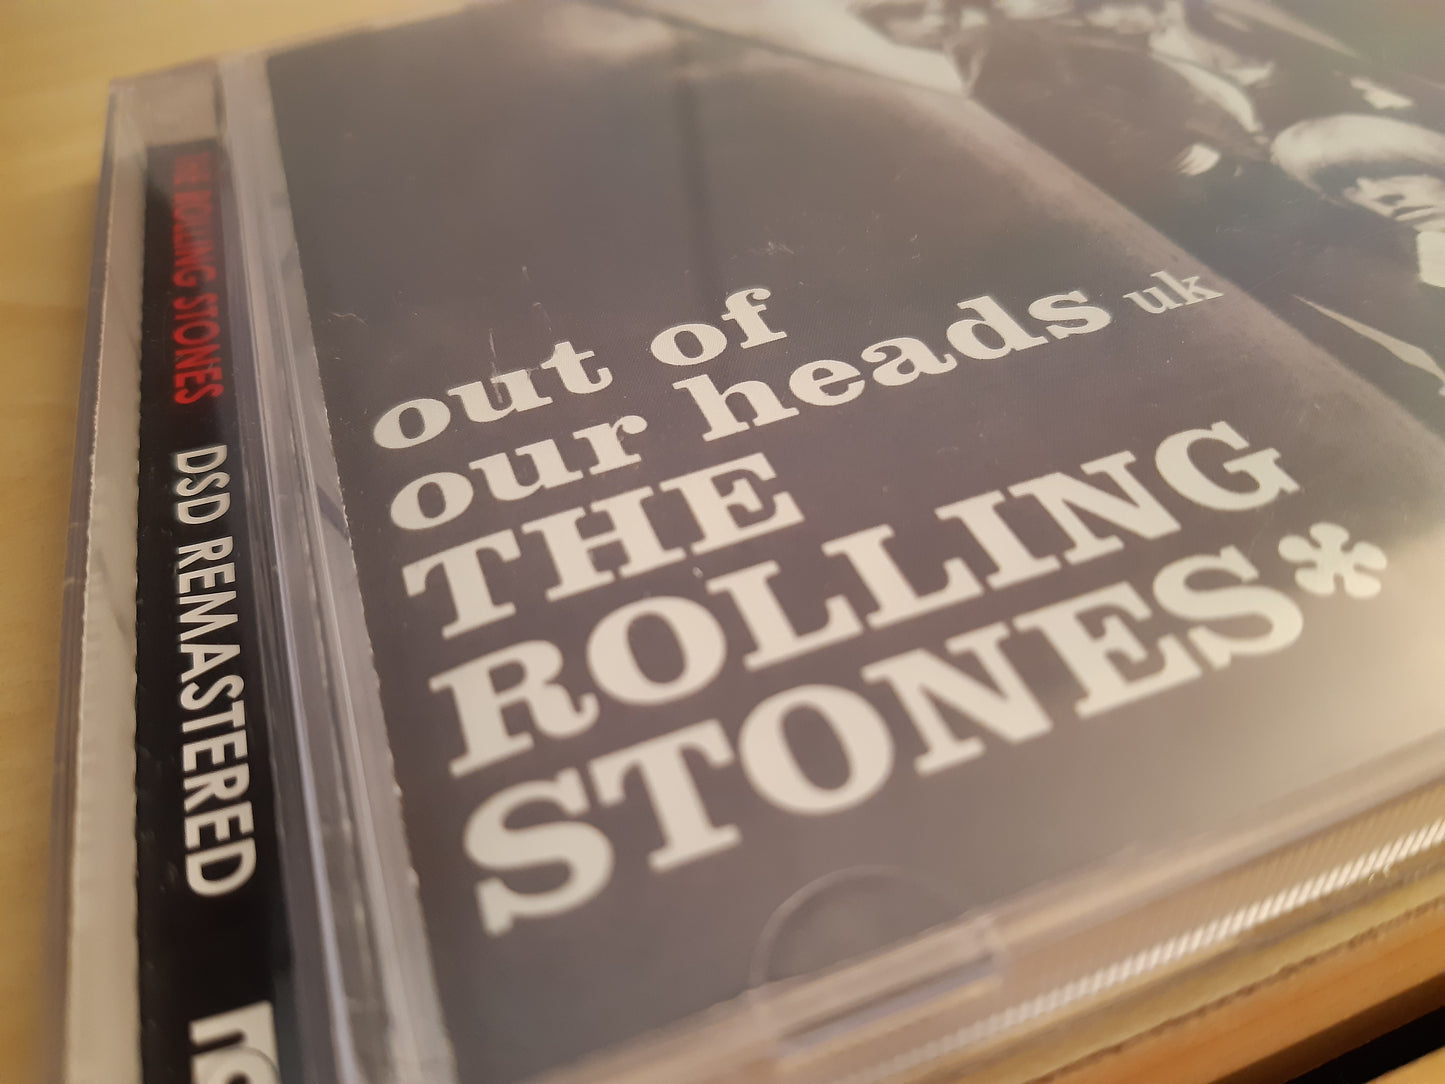 the rolling stones - out of our heads uk - cd